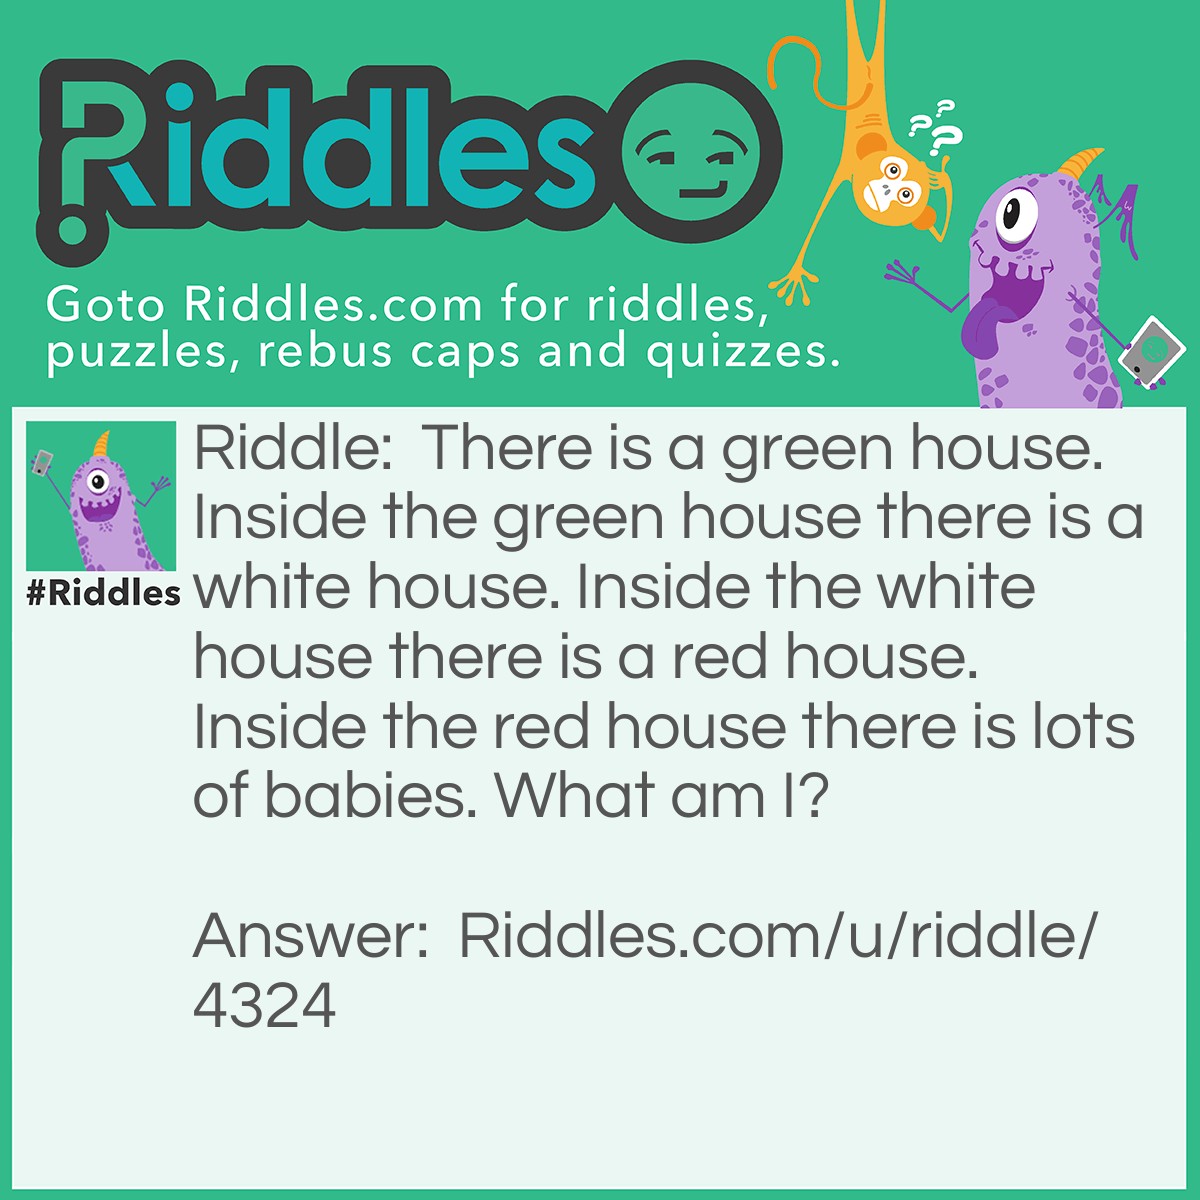 Riddle: There is a green house. Inside the green house there is a white house. Inside the white house there is a red house. Inside the red house there is lots of babies. What am I? Answer: A watermelon